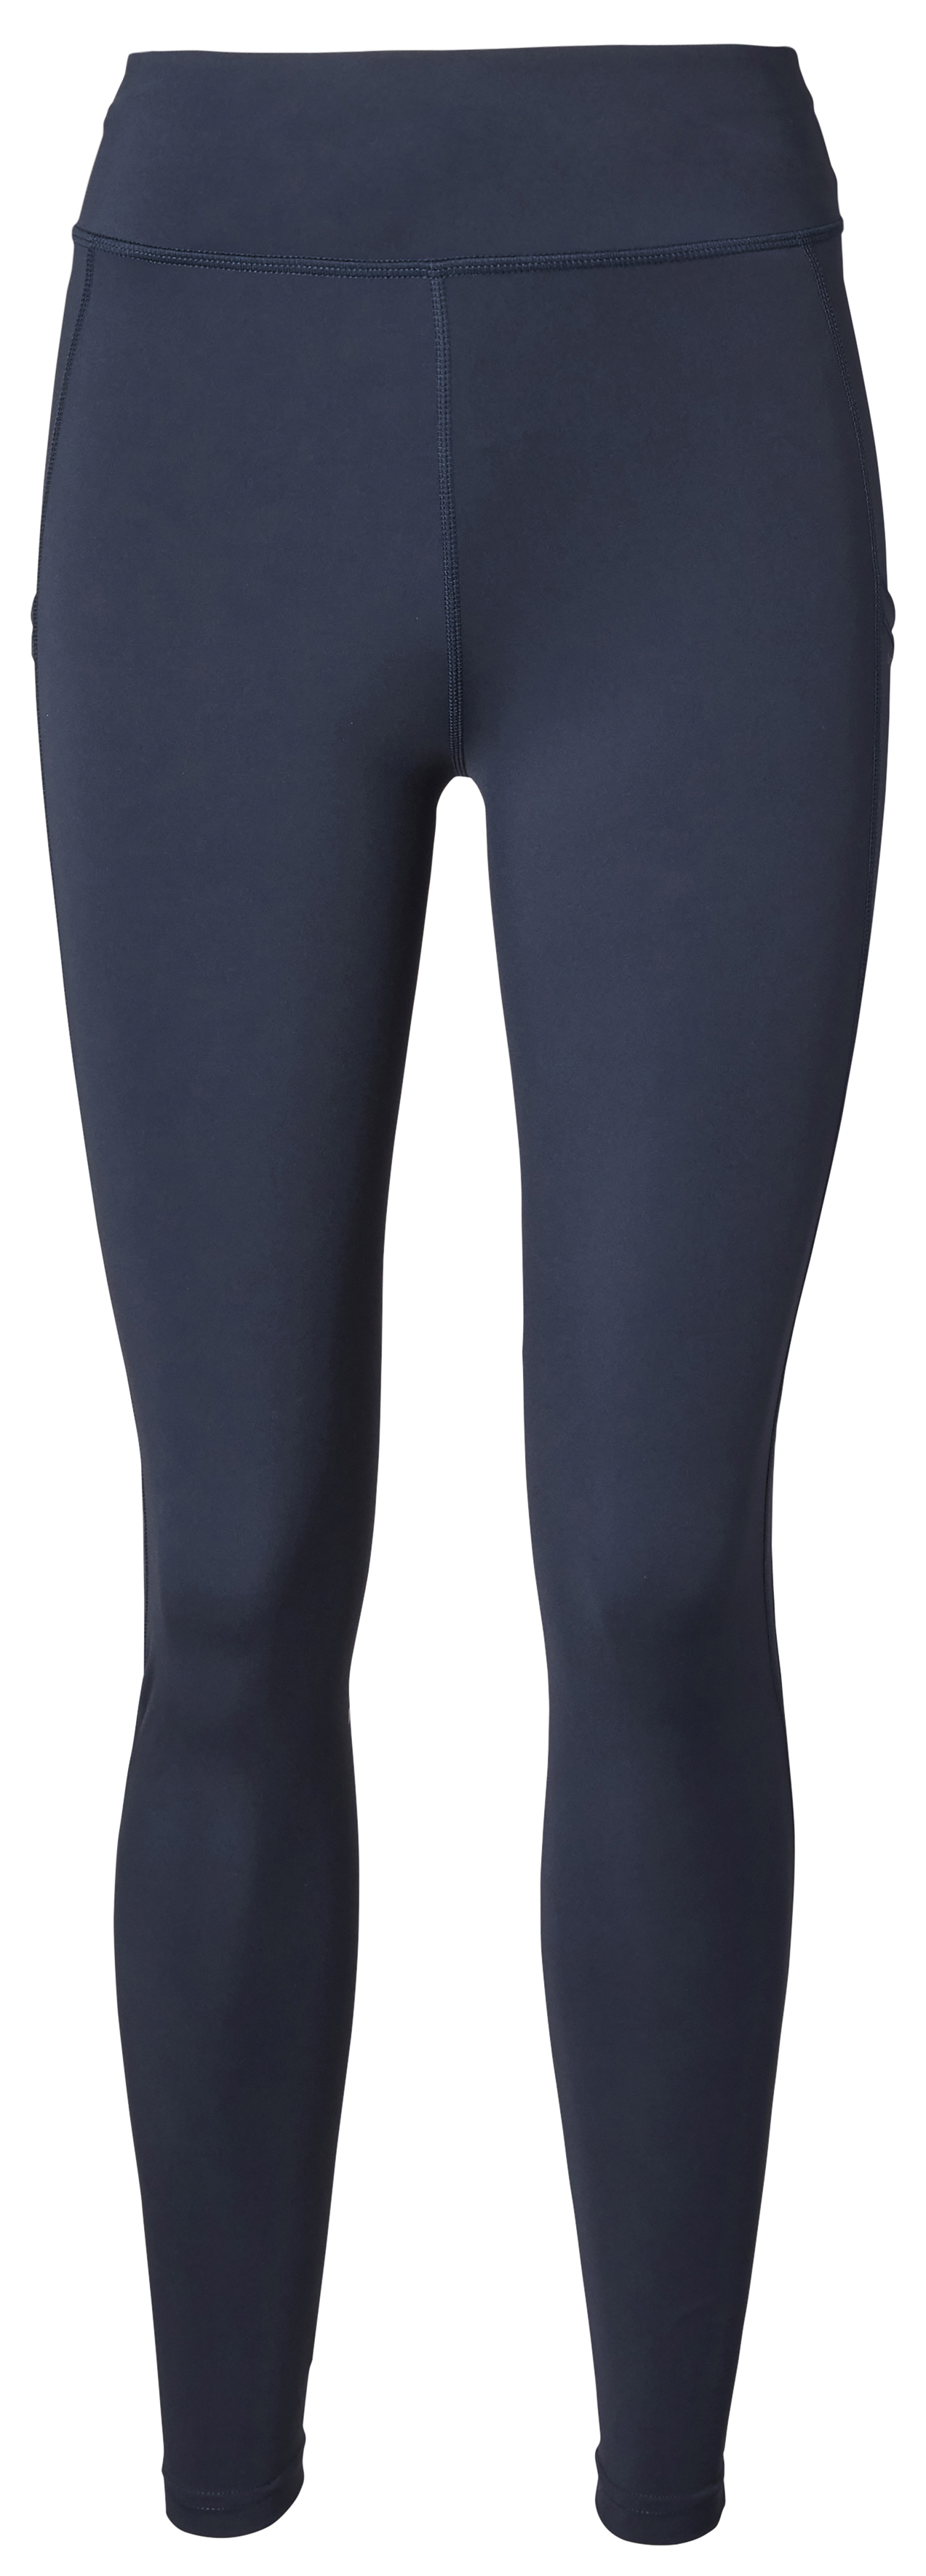 Tried and tested: Mountain Horse Darcy Tech Tights - Your Horse